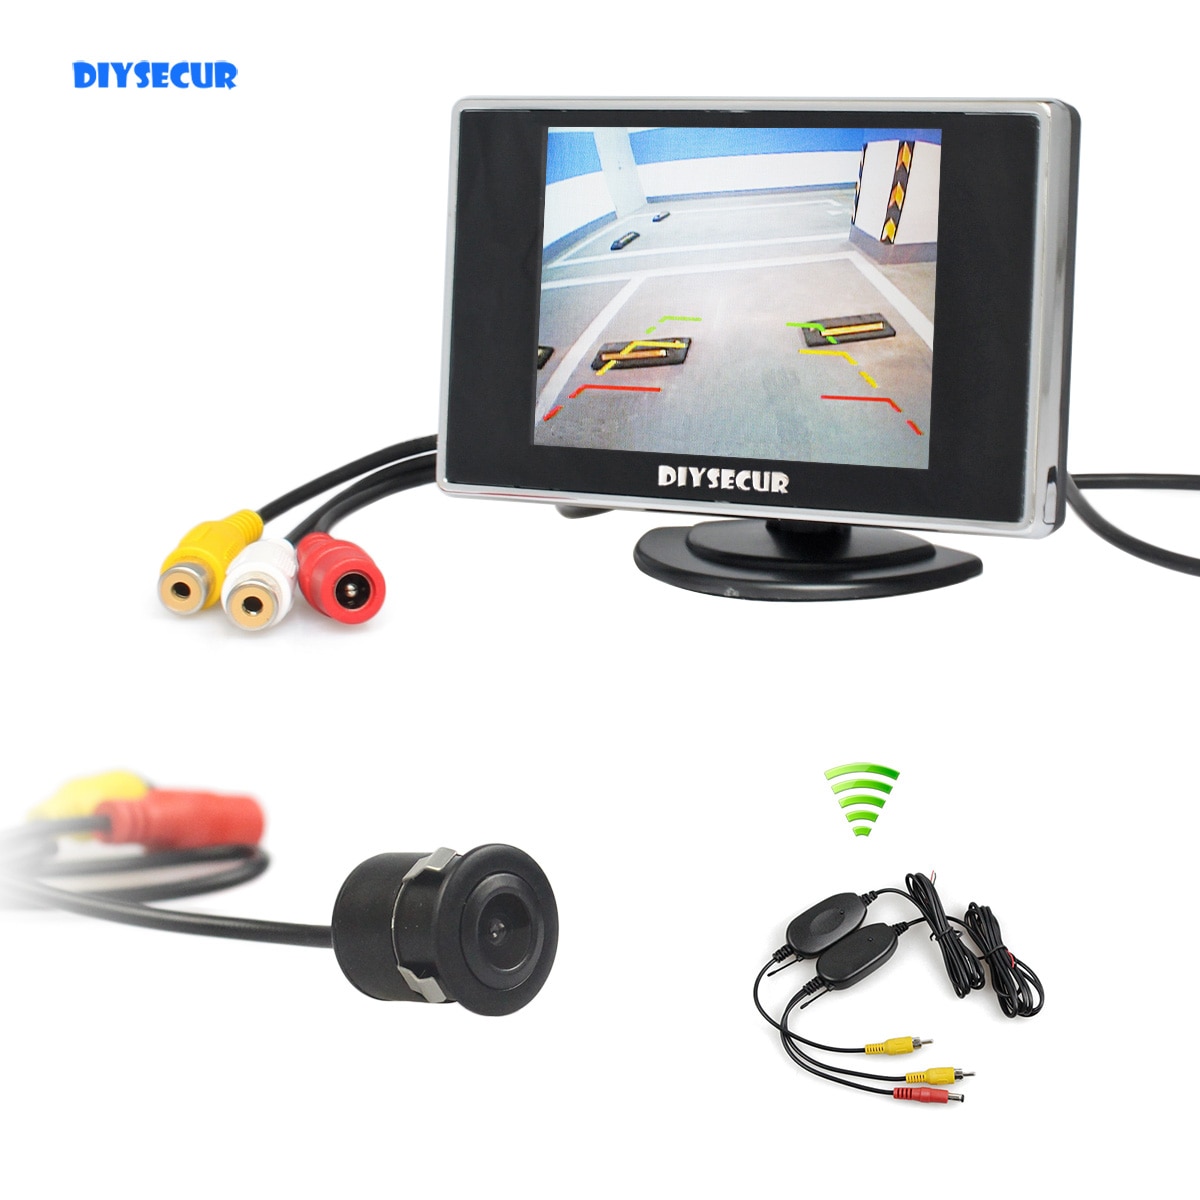 DIYSECUR Draadloze 3.5 "TFT LCD Auto Monitor Waterdichte Achteruitrijcamera Auto Camera Achteruitrijcamera Parking Assistance System Kit